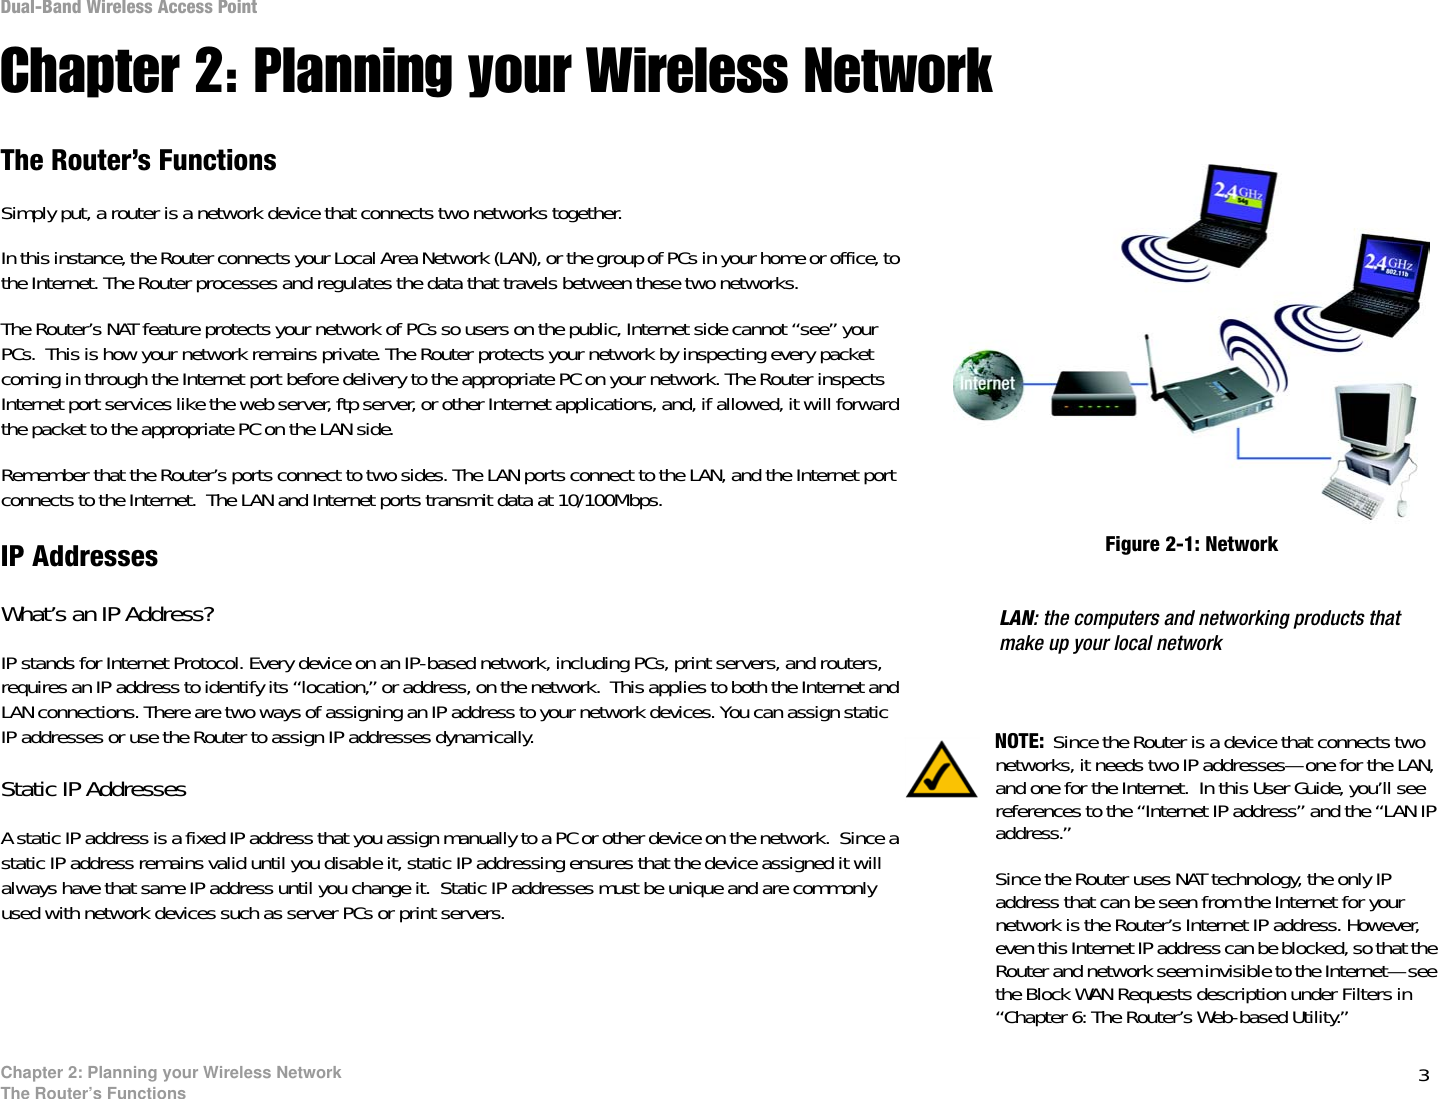 3Chapter 2: Planning your Wireless NetworkThe Router’s FunctionsDual-Band Wireless Access PointChapter 2: Planning your Wireless NetworkThe Router’s FunctionsSimply put, a router is a network device that connects two networks together. In this instance, the Router connects your Local Area Network (LAN), or the group of PCs in your home or office, to the Internet. The Router processes and regulates the data that travels between these two networks.The Router’s NAT feature protects your network of PCs so users on the public, Internet side cannot “see” your PCs.  This is how your network remains private. The Router protects your network by inspecting every packet coming in through the Internet port before delivery to the appropriate PC on your network. The Router inspects Internet port services like the web server, ftp server, or other Internet applications, and, if allowed, it will forward the packet to the appropriate PC on the LAN side.Remember that the Router’s ports connect to two sides. The LAN ports connect to the LAN, and the Internet port connects to the Internet.  The LAN and Internet ports transmit data at 10/100Mbps.IP AddressesWhat’s an IP Address?IP stands for Internet Protocol. Every device on an IP-based network, including PCs, print servers, and routers, requires an IP address to identify its “location,” or address, on the network.  This applies to both the Internet and LAN connections. There are two ways of assigning an IP address to your network devices. You can assign static IP addresses or use the Router to assign IP addresses dynamically.Static IP Addresses  A static IP address is a fixed IP address that you assign manually to a PC or other device on the network.  Since a static IP address remains valid until you disable it, static IP addressing ensures that the device assigned it will always have that same IP address until you change it.  Static IP addresses must be unique and are commonly used with network devices such as server PCs or print servers. LAN: the computers and networking products that make up your local networkNOTE: Since the Router is a device that connects two networks, it needs two IP addresses—one for the LAN, and one for the Internet.  In this User Guide, you’ll see references to the “Internet IP address” and the “LAN IP address.”Since the Router uses NAT technology, the only IP address that can be seen from the Internet for your network is the Router’s Internet IP address. However, even this Internet IP address can be blocked, so that the Router and network seem invisible to the Internet—see the Block WAN Requests description under Filters in “Chapter 6: The Router’s Web-based Utility.”Figure 2-1: Network